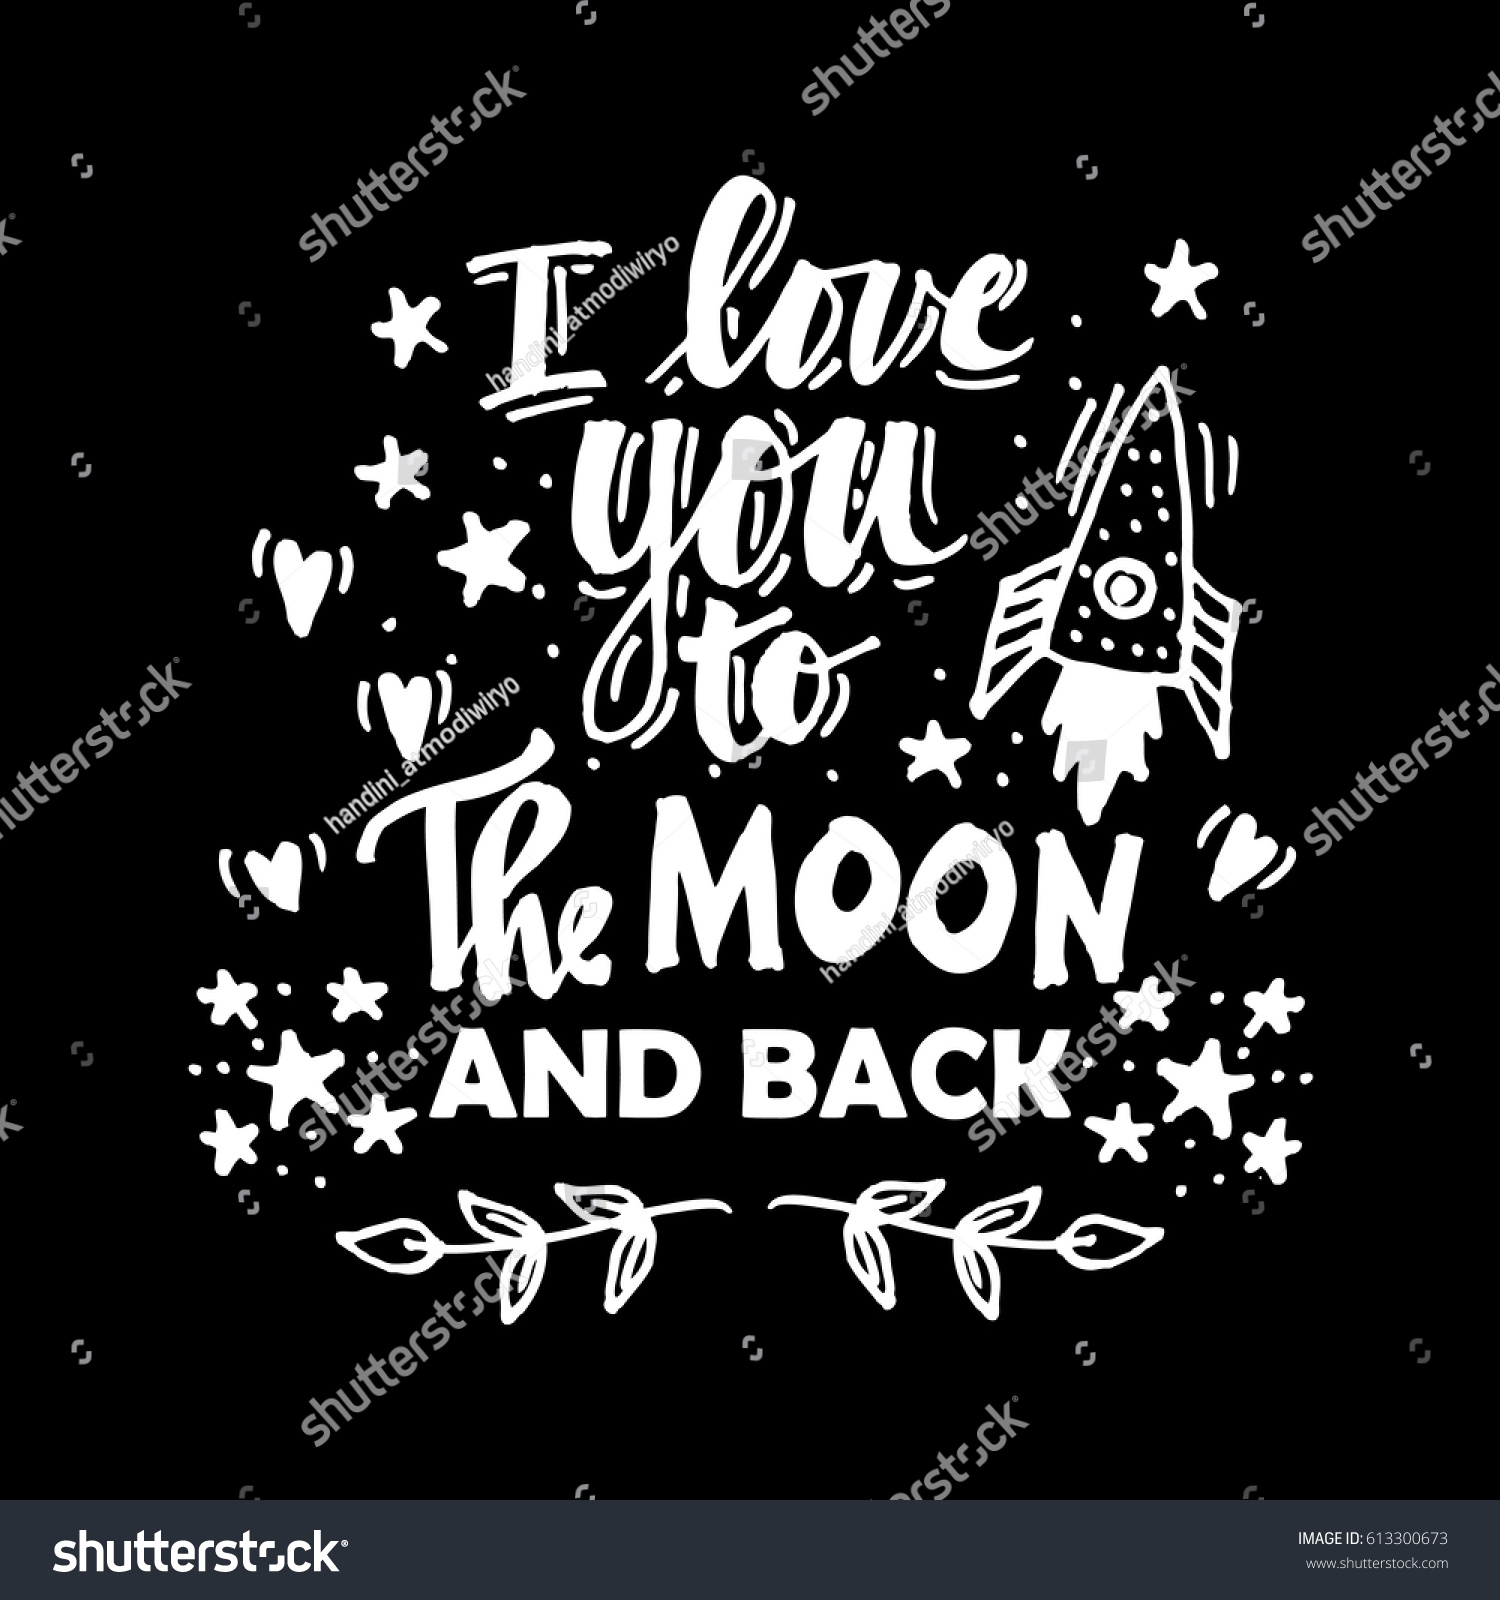 I love you to the moon and back Quote hand lettering calligraphy